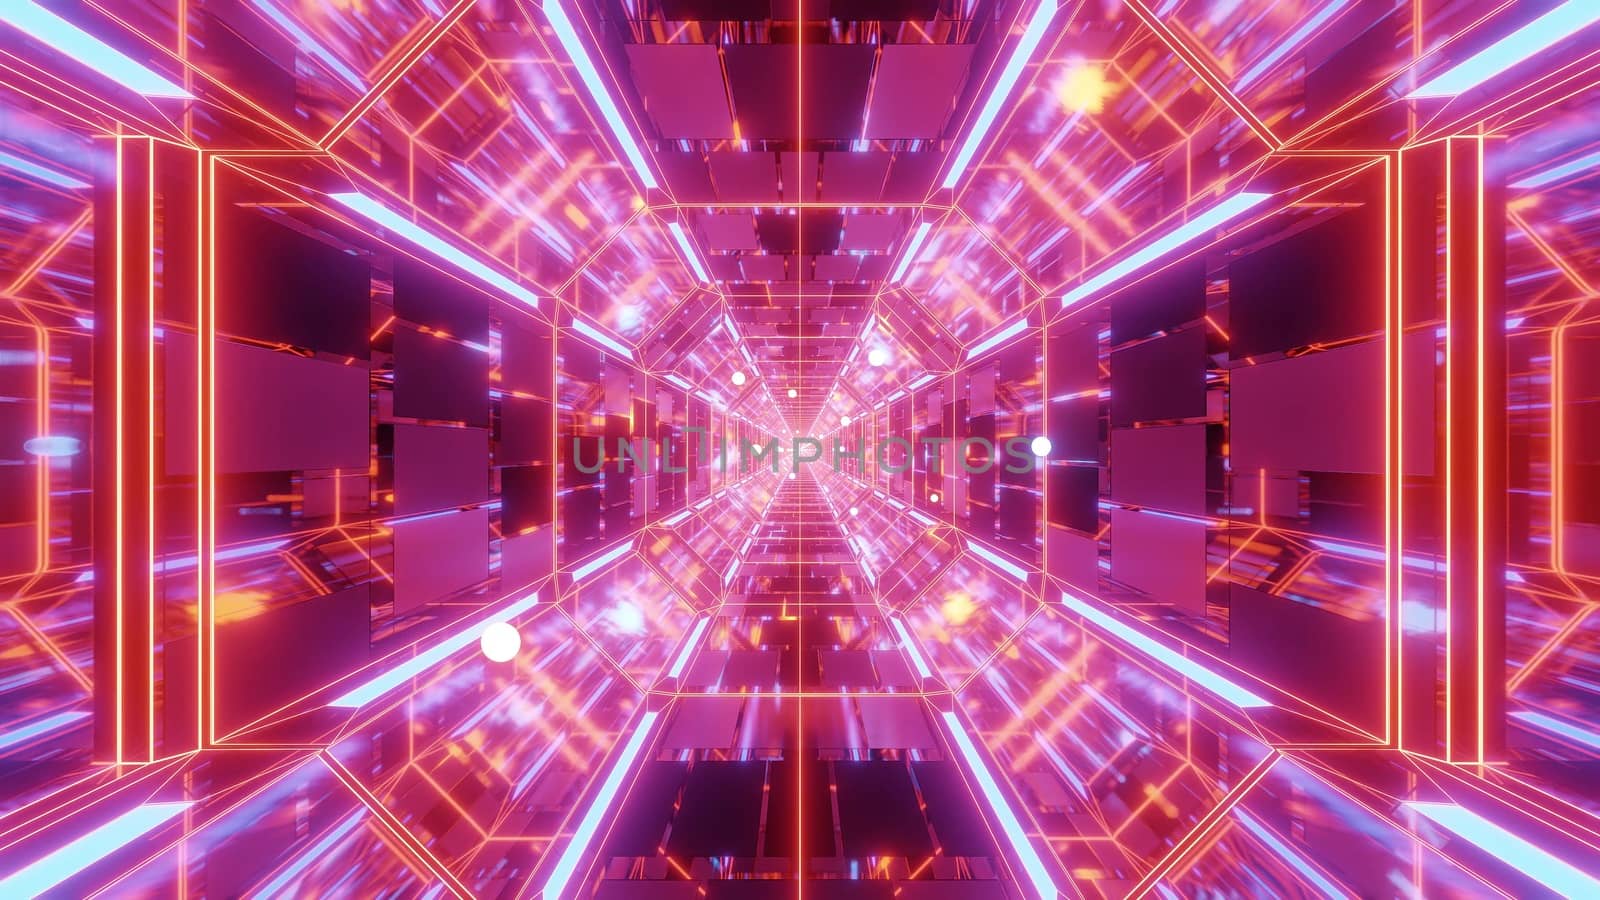 endlless science-fiction space galaxy glass tunnel corridor with flying glowing sphere particles 3d illustration wallpaper background, futuristic scifi glass 3d rendering design graphic artwork